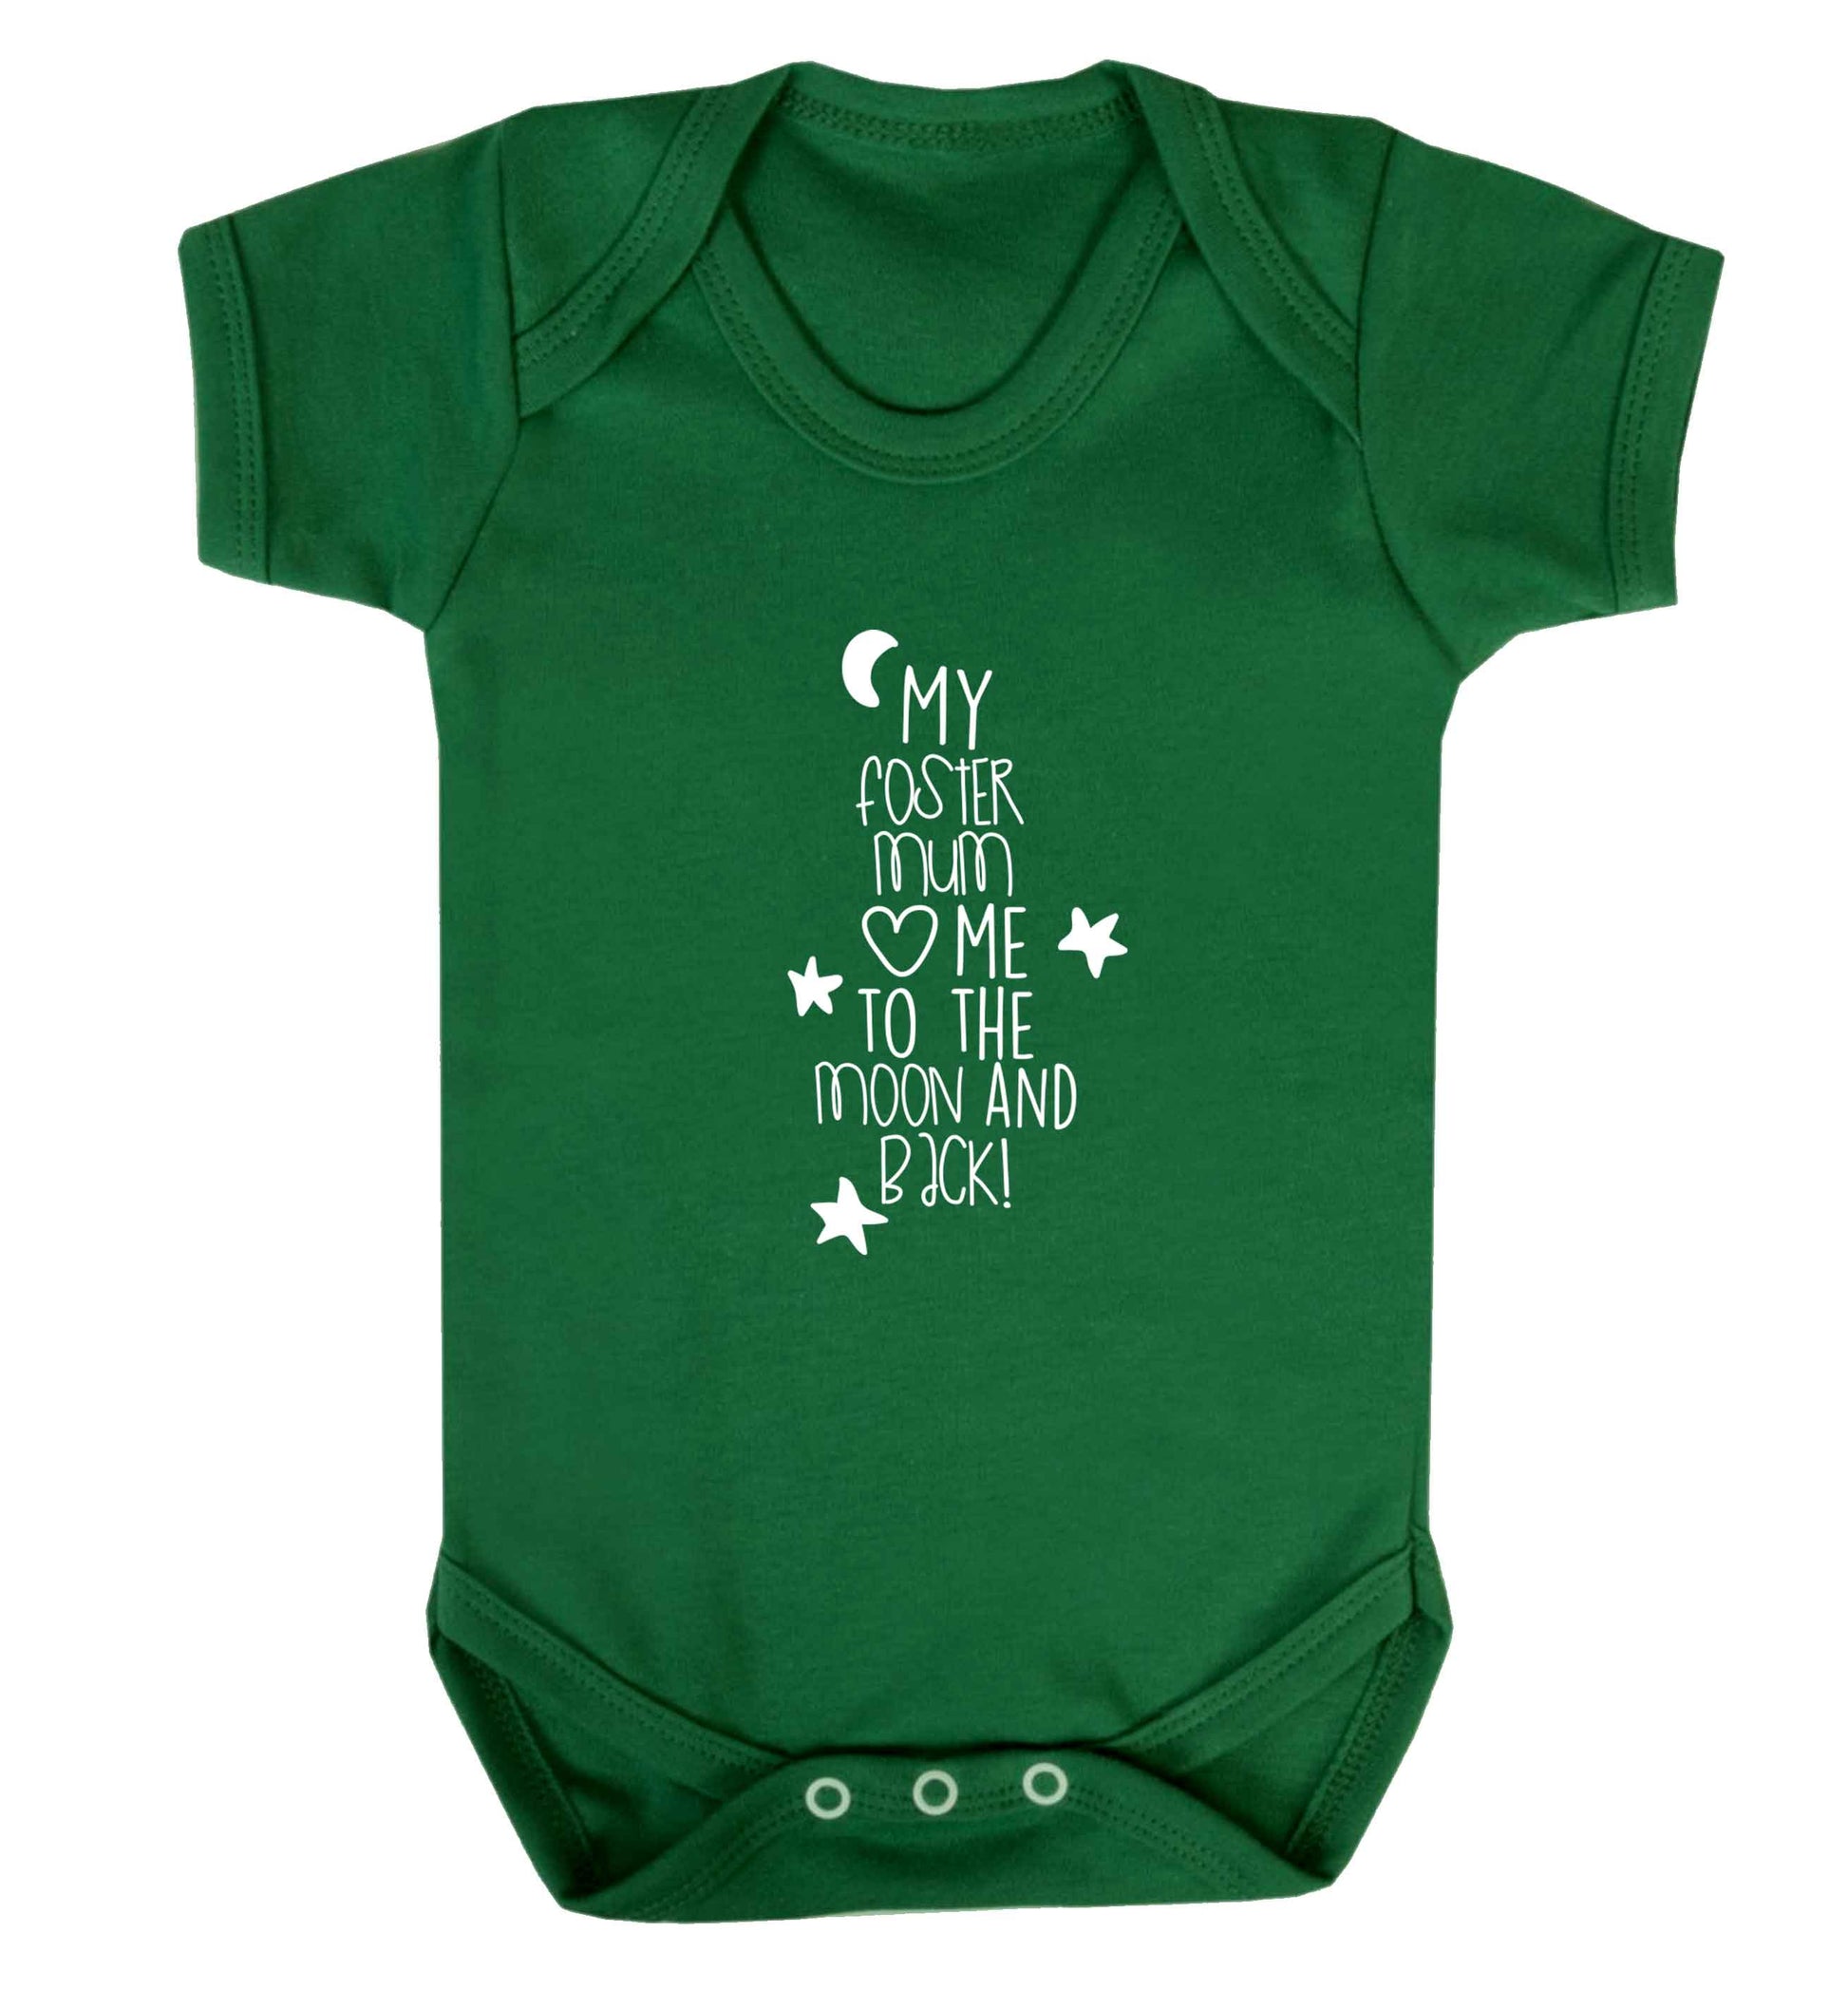 My foster mum loves me to the moon and back baby vest green 18-24 months